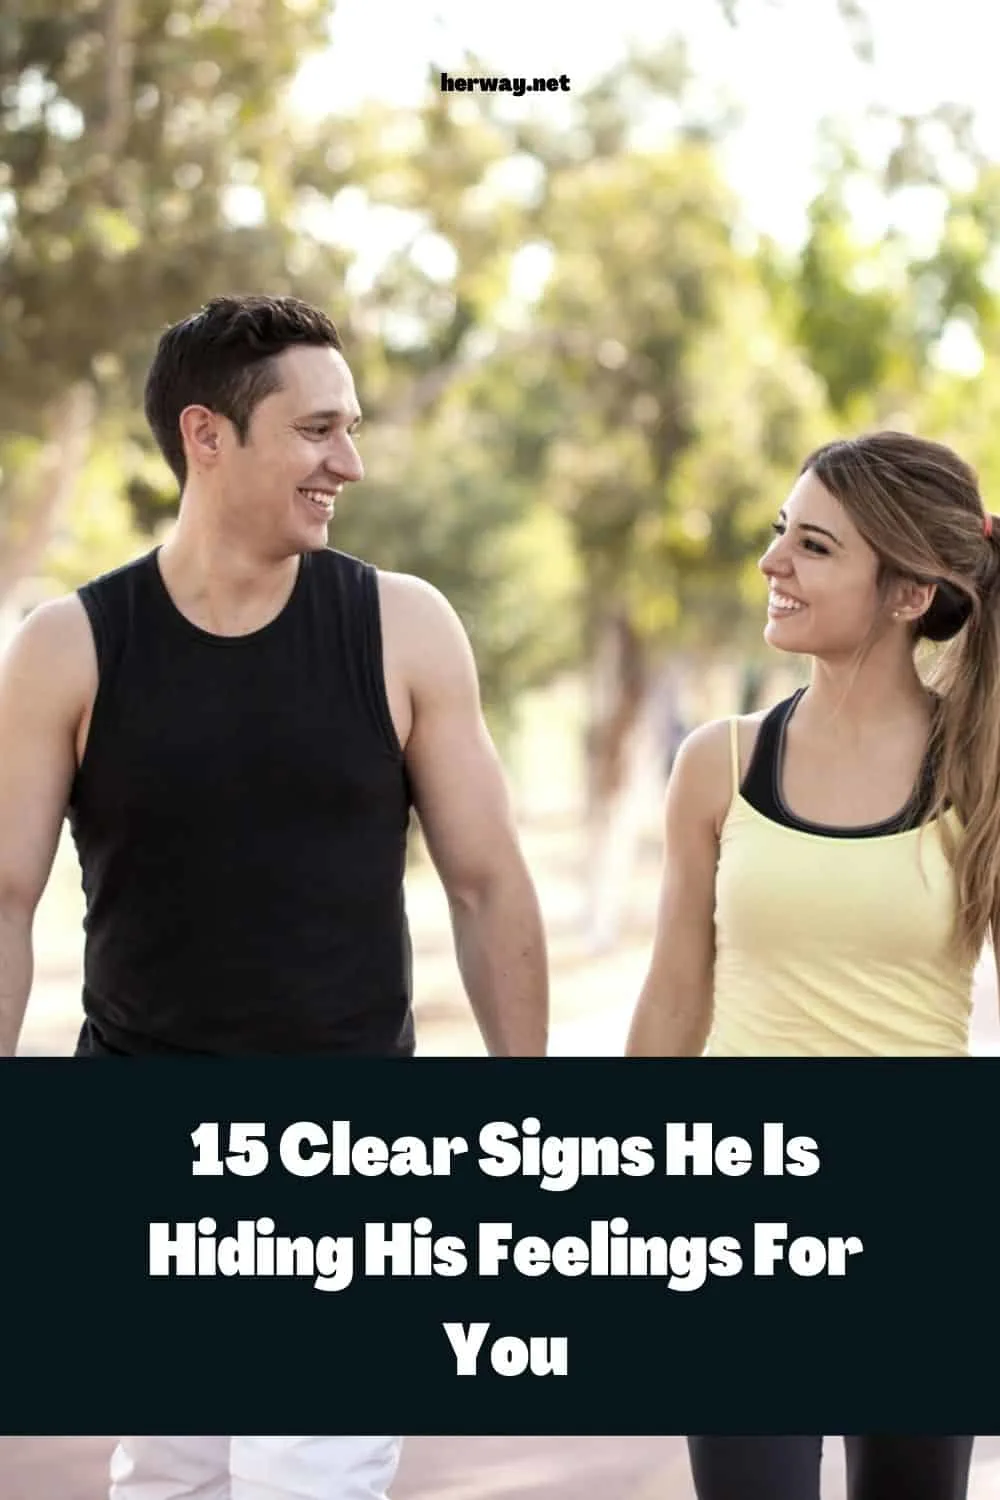 15 Clear Signs He Is Hiding His Feelings For You